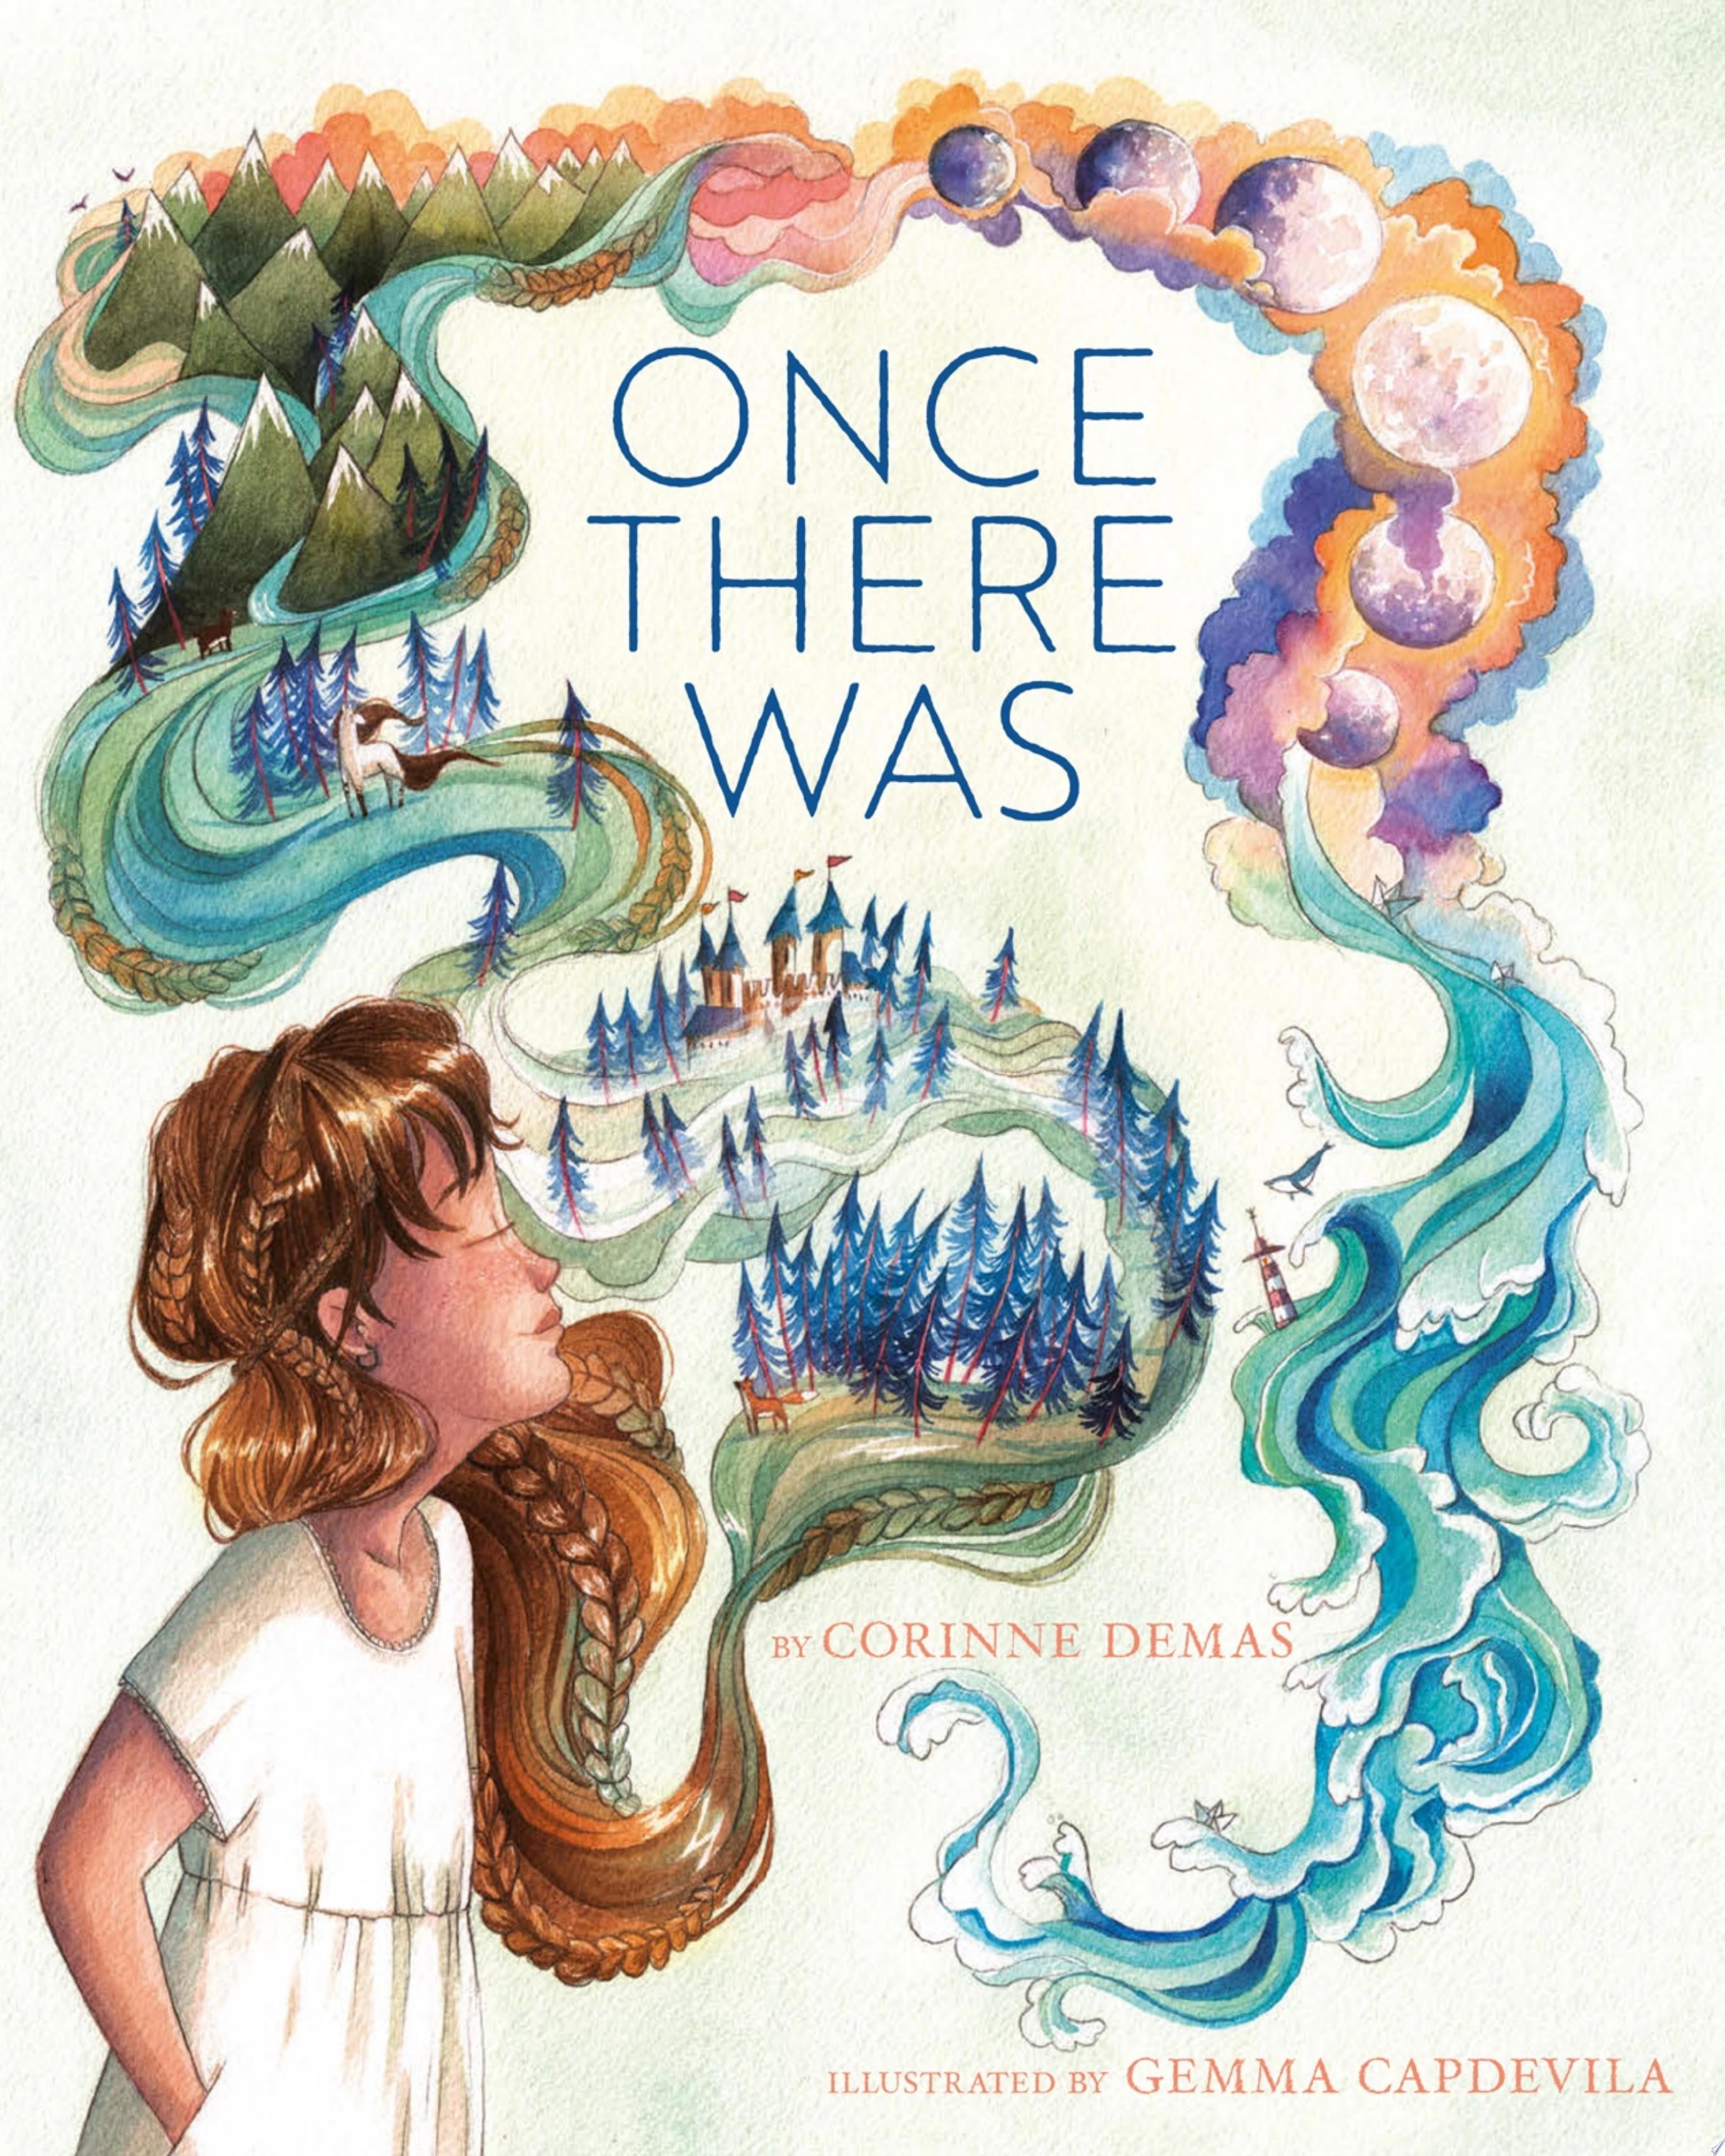 Image for "Once There Was"